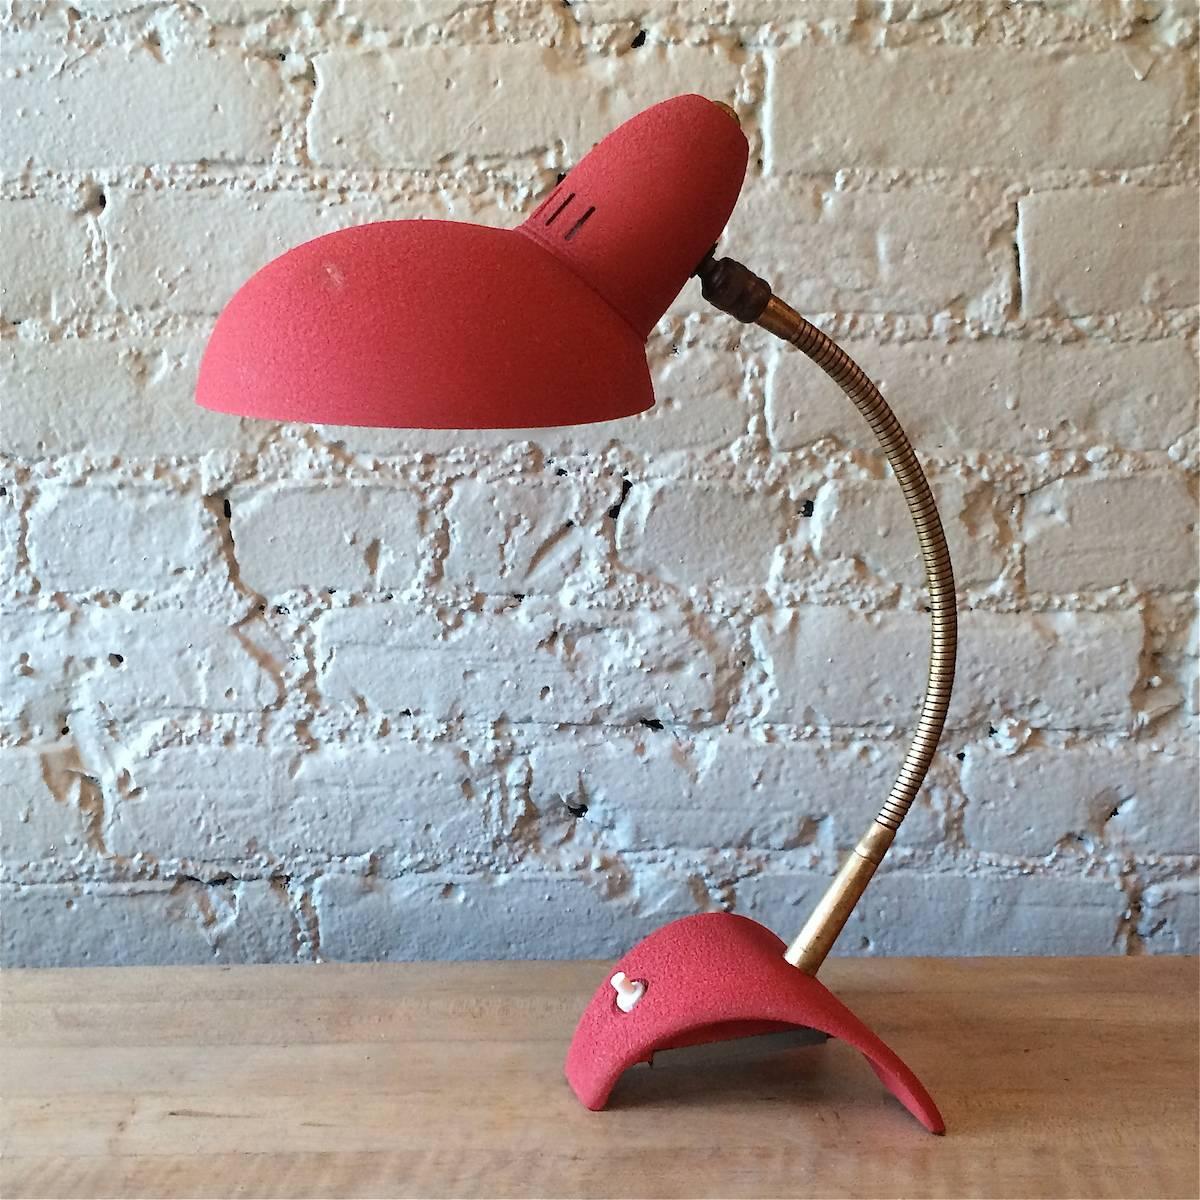 Mid century modern, brass gooseneck, desk lamp with red shrink paint base and shade circa 1950's